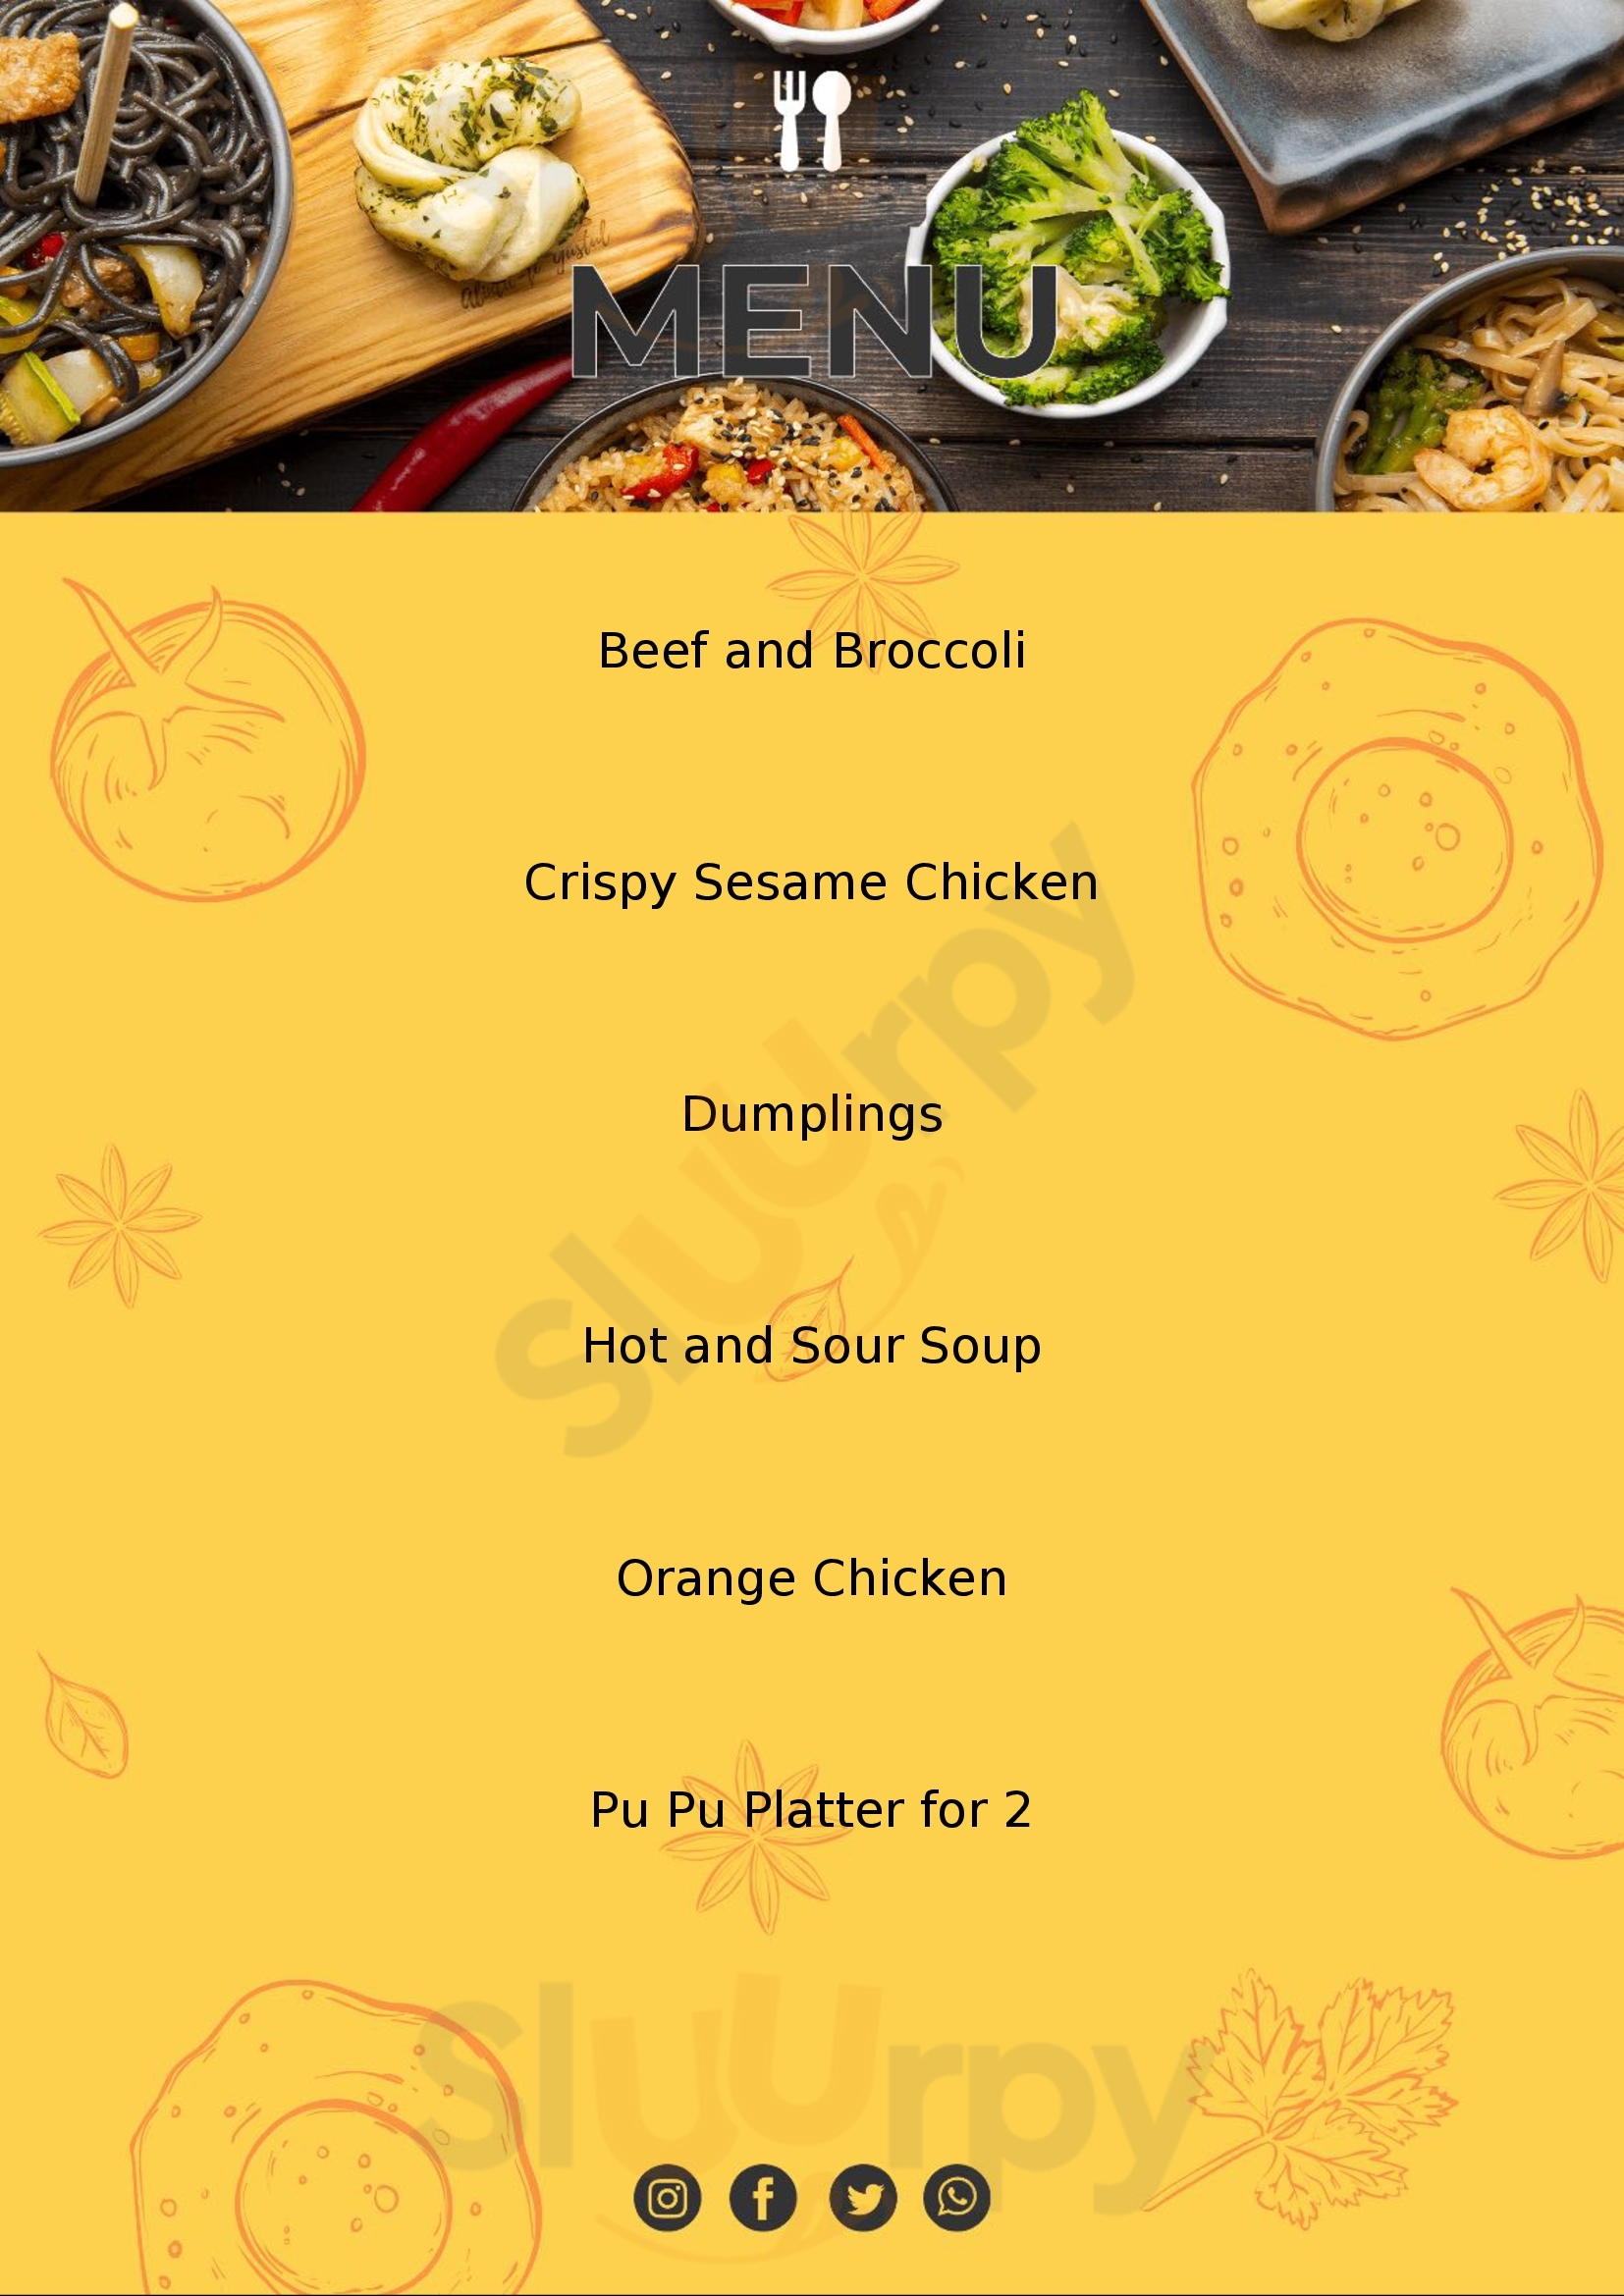 Chieng Gardens Chinese Cuisine Lincoln Menu - 1